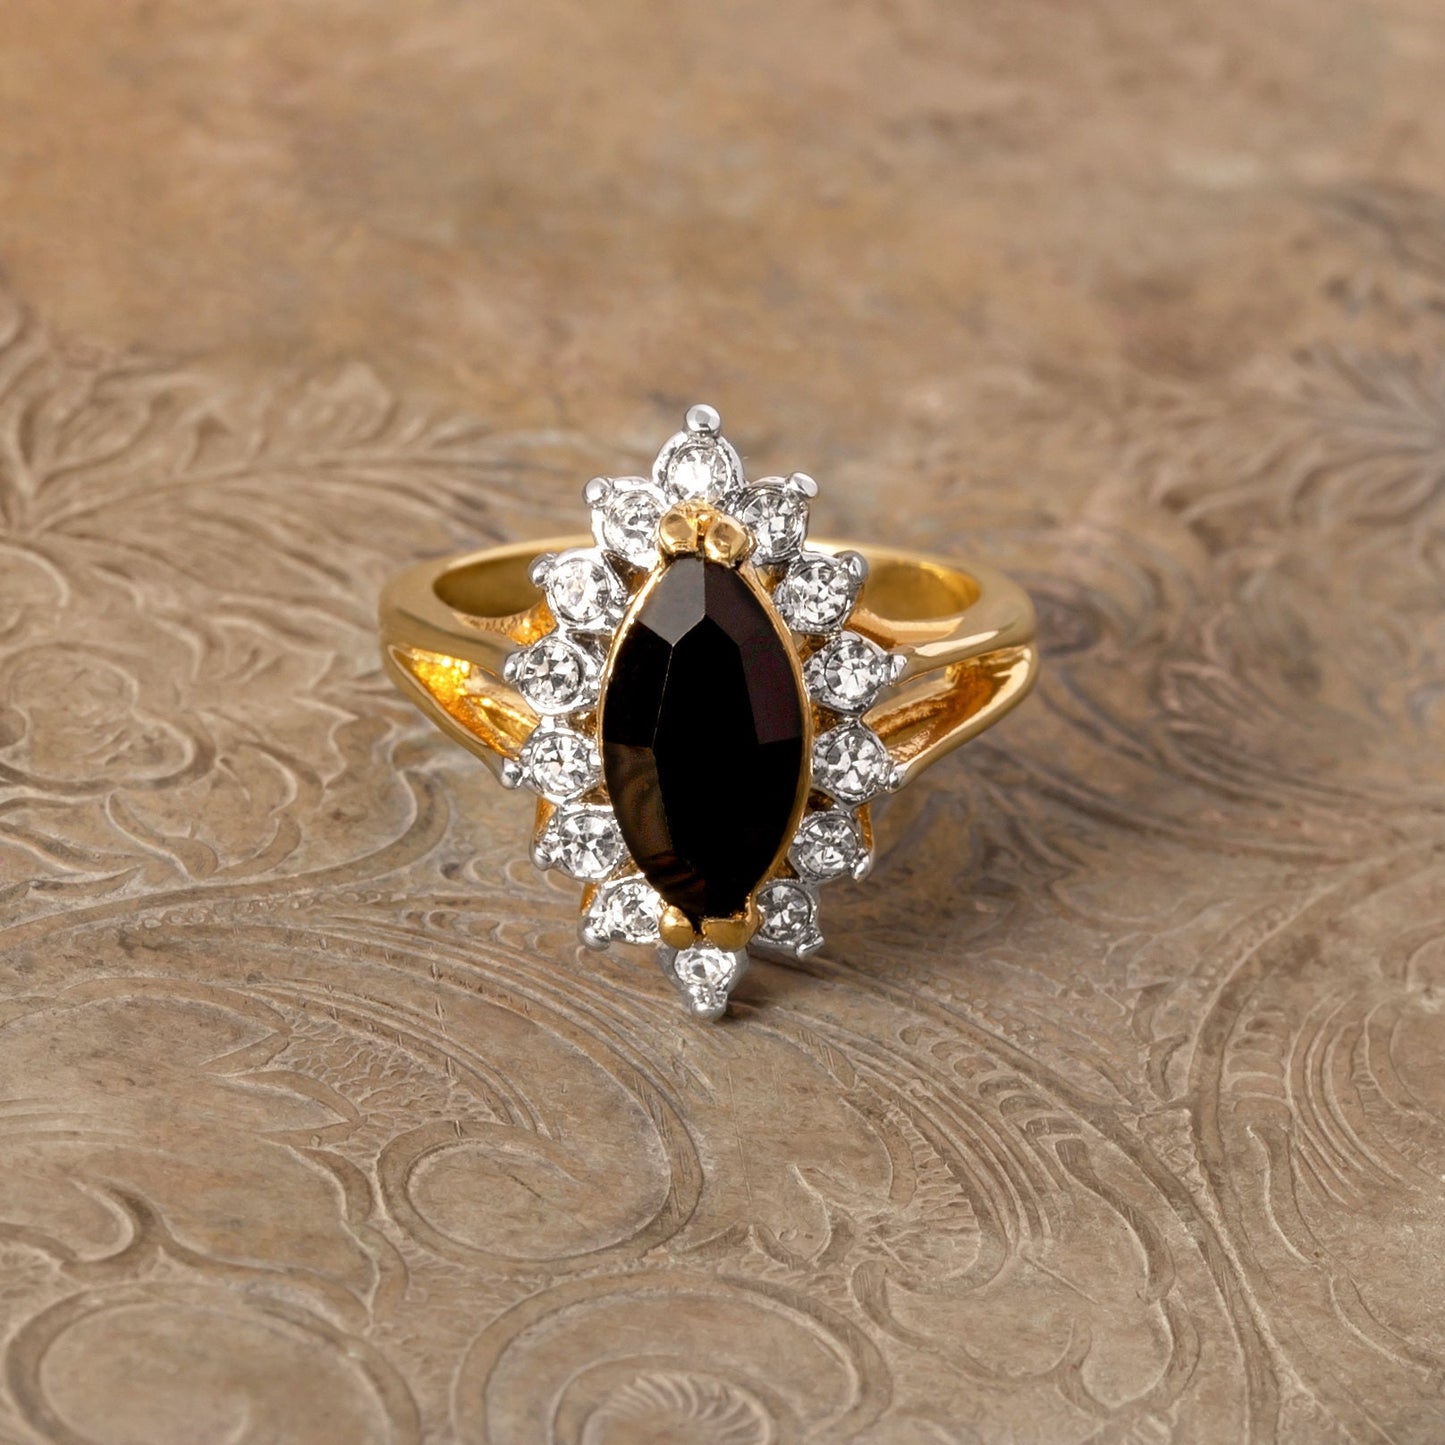 Vintage Ring Smoke Topaz and Clear Swarovski Crystals 18k Gold Plated Antique Womans Jewelry Topaz #R1891